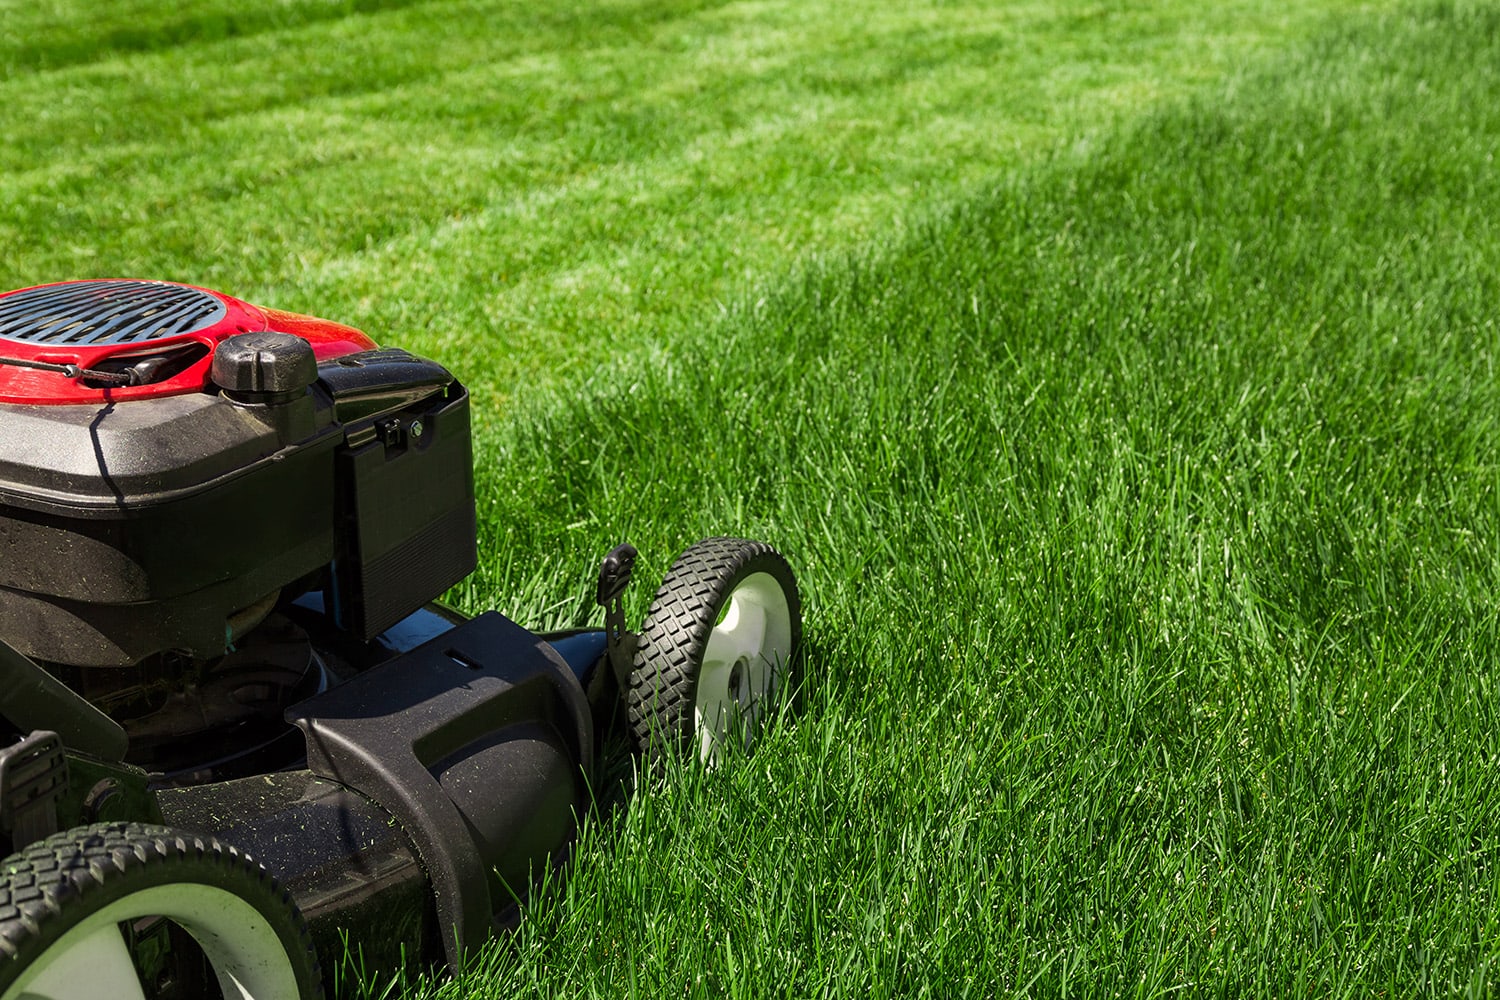 Why You Should Maintain Your Lawn Regularly